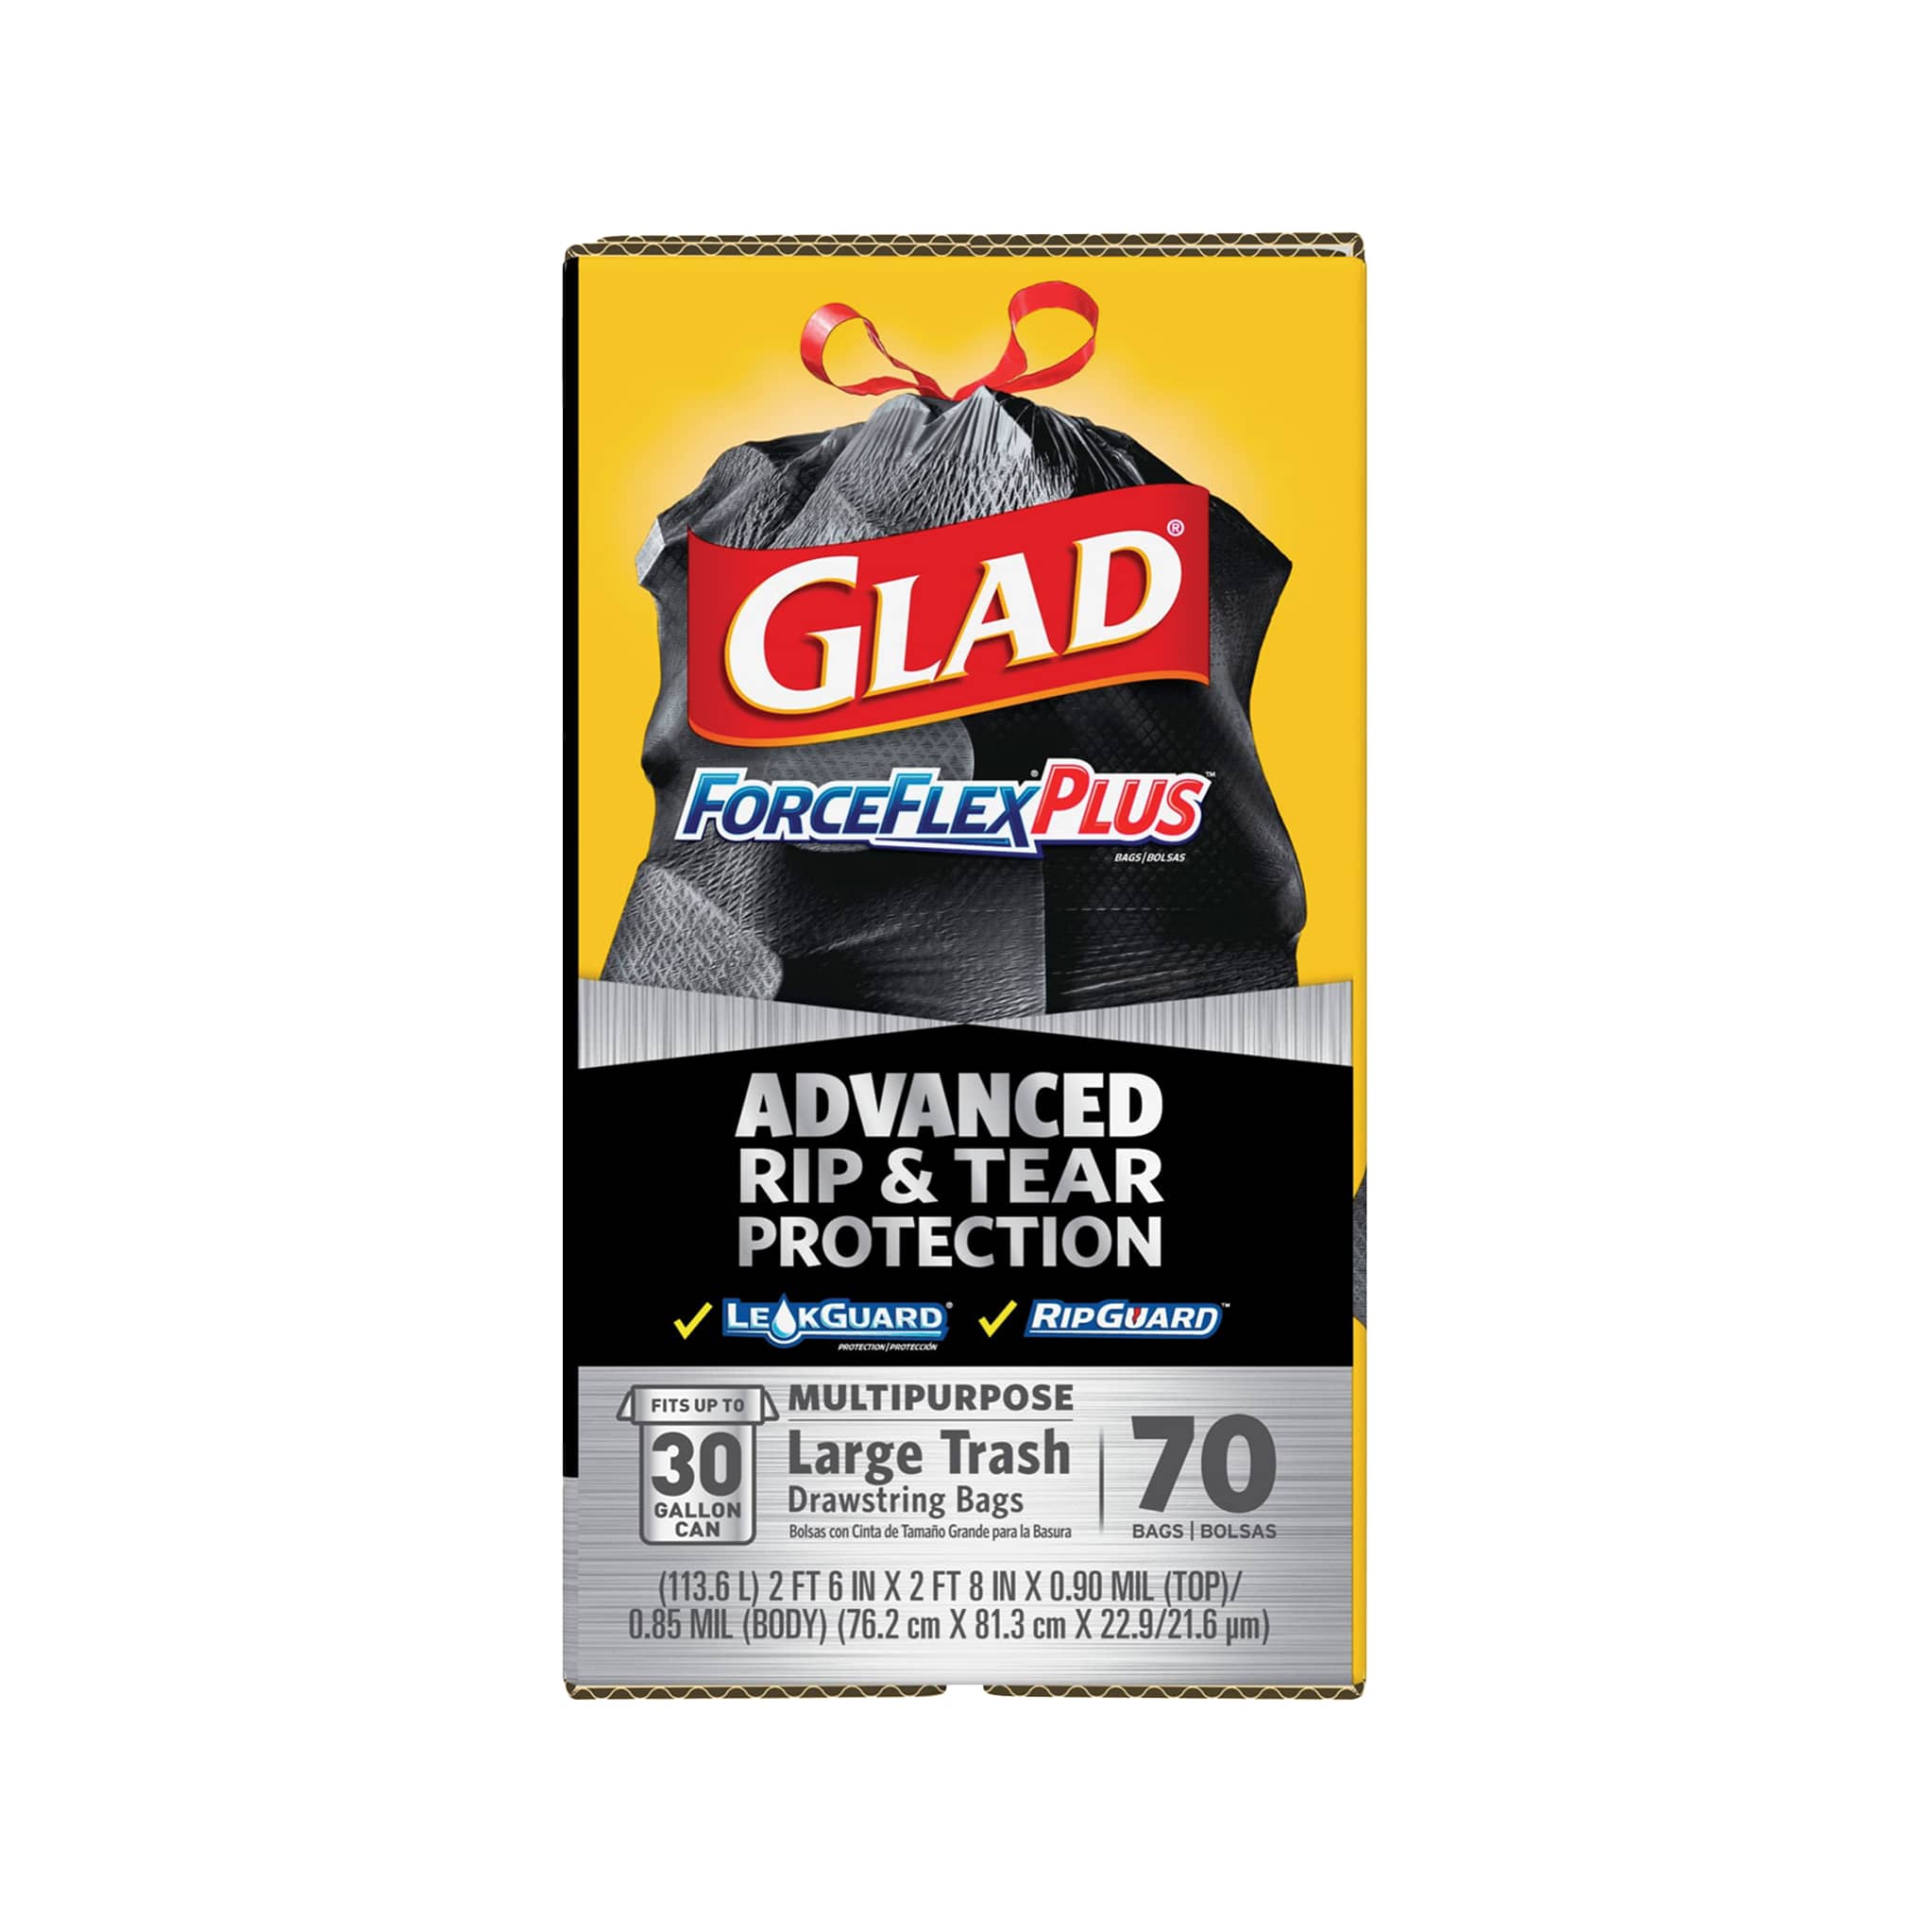 8) Boxes of Glad Force Flex Trash Bags, 30-Gallon - Roller Auctions